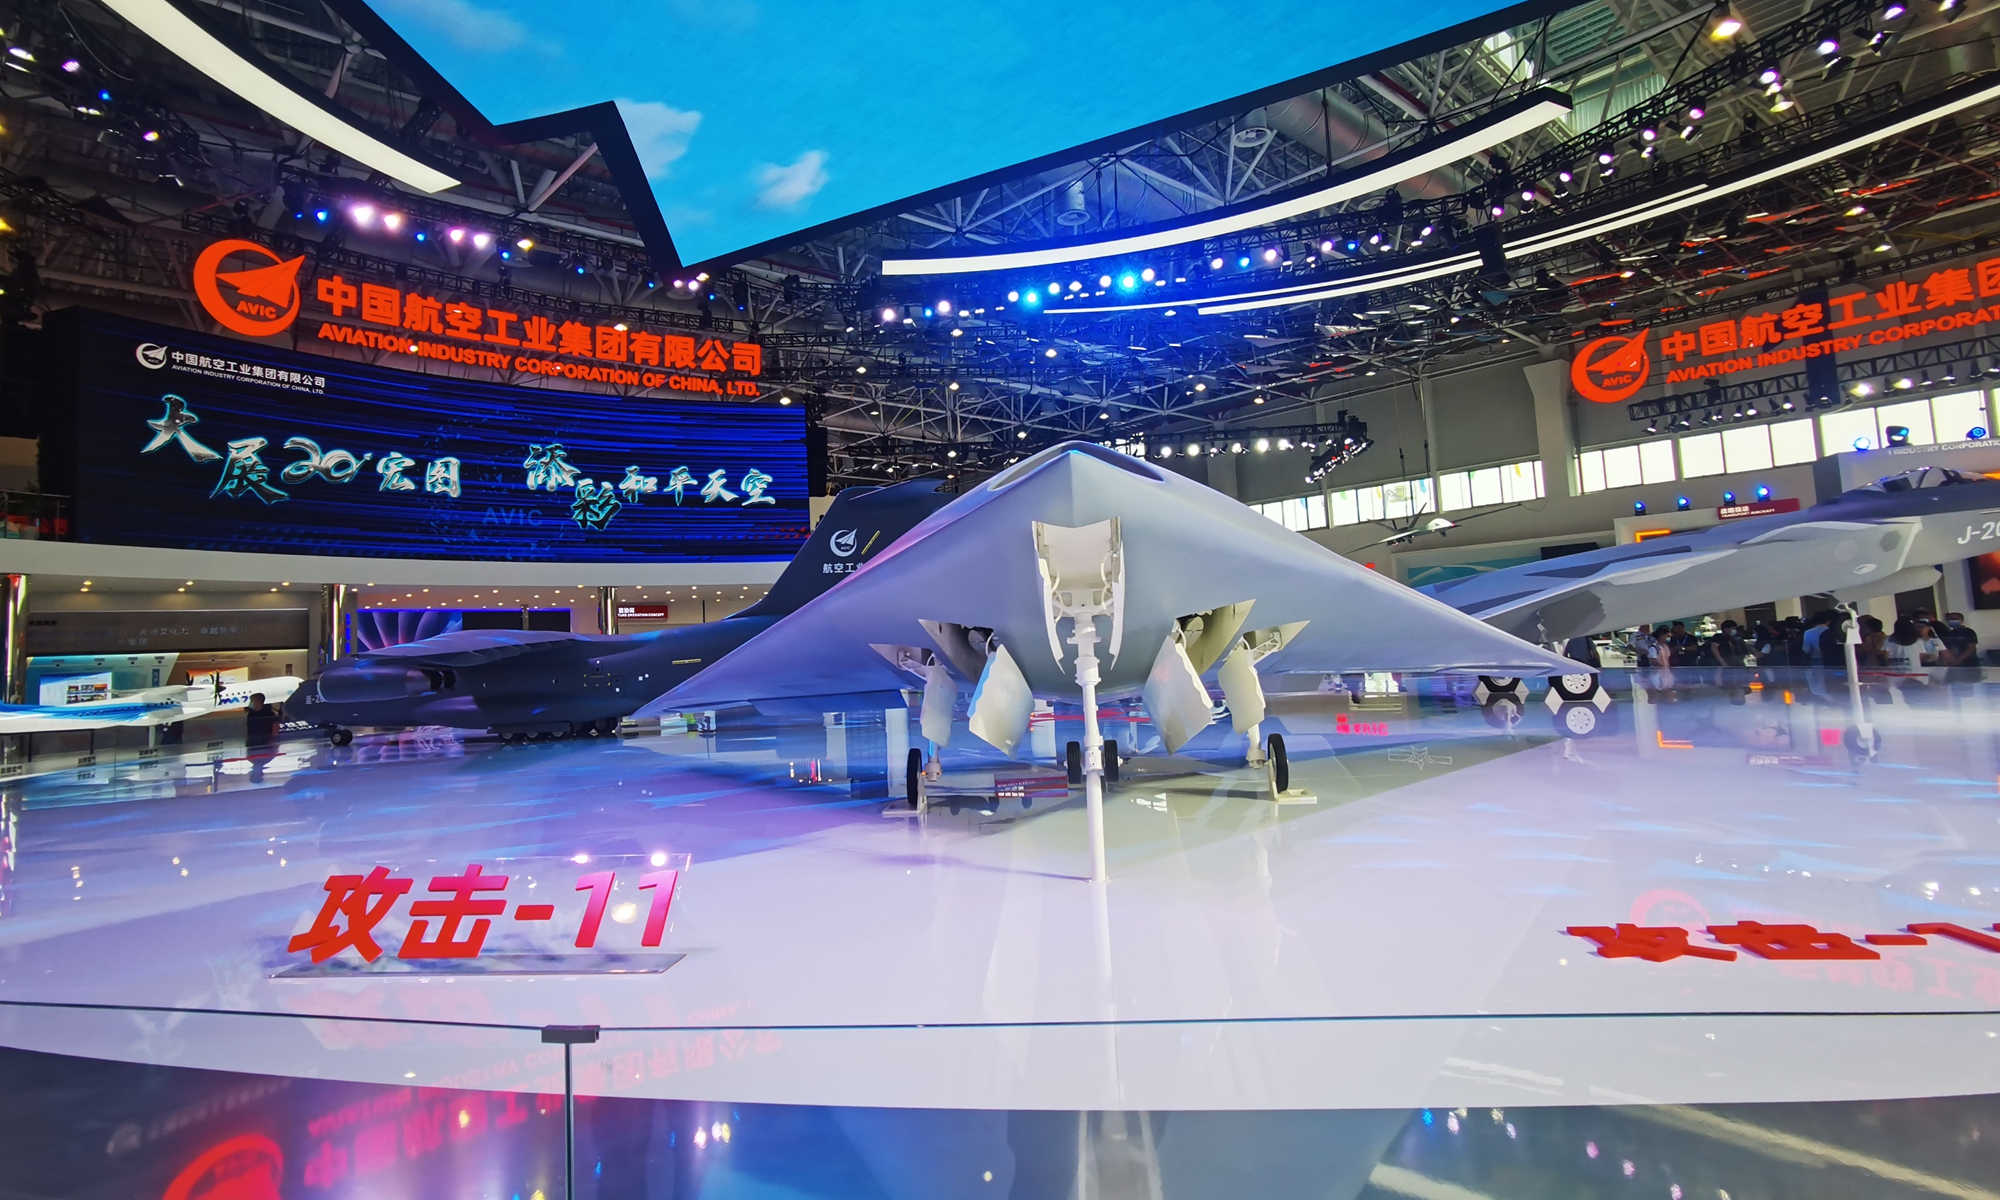 The GJ-11 combat drone is on display at the exhibition hall of the Aviation Industry Corp of China. Photo: Yang Sheng/Global Times